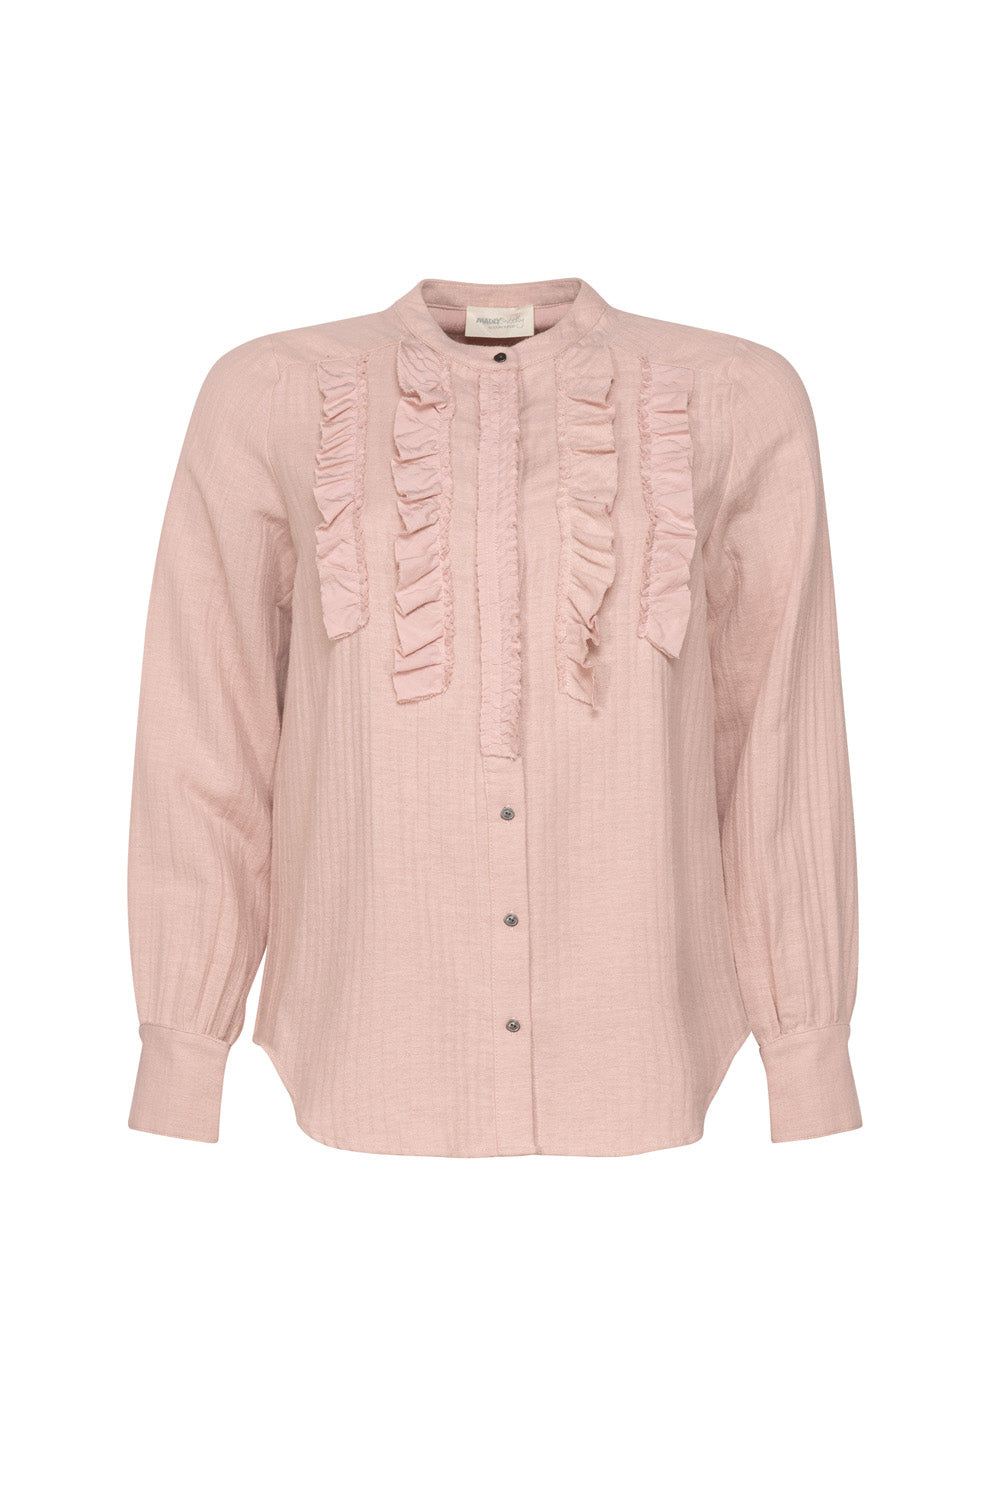 MADLY SWEETLY COTTON TALE SHIRT - BLUSH - THE VOGUE STORE